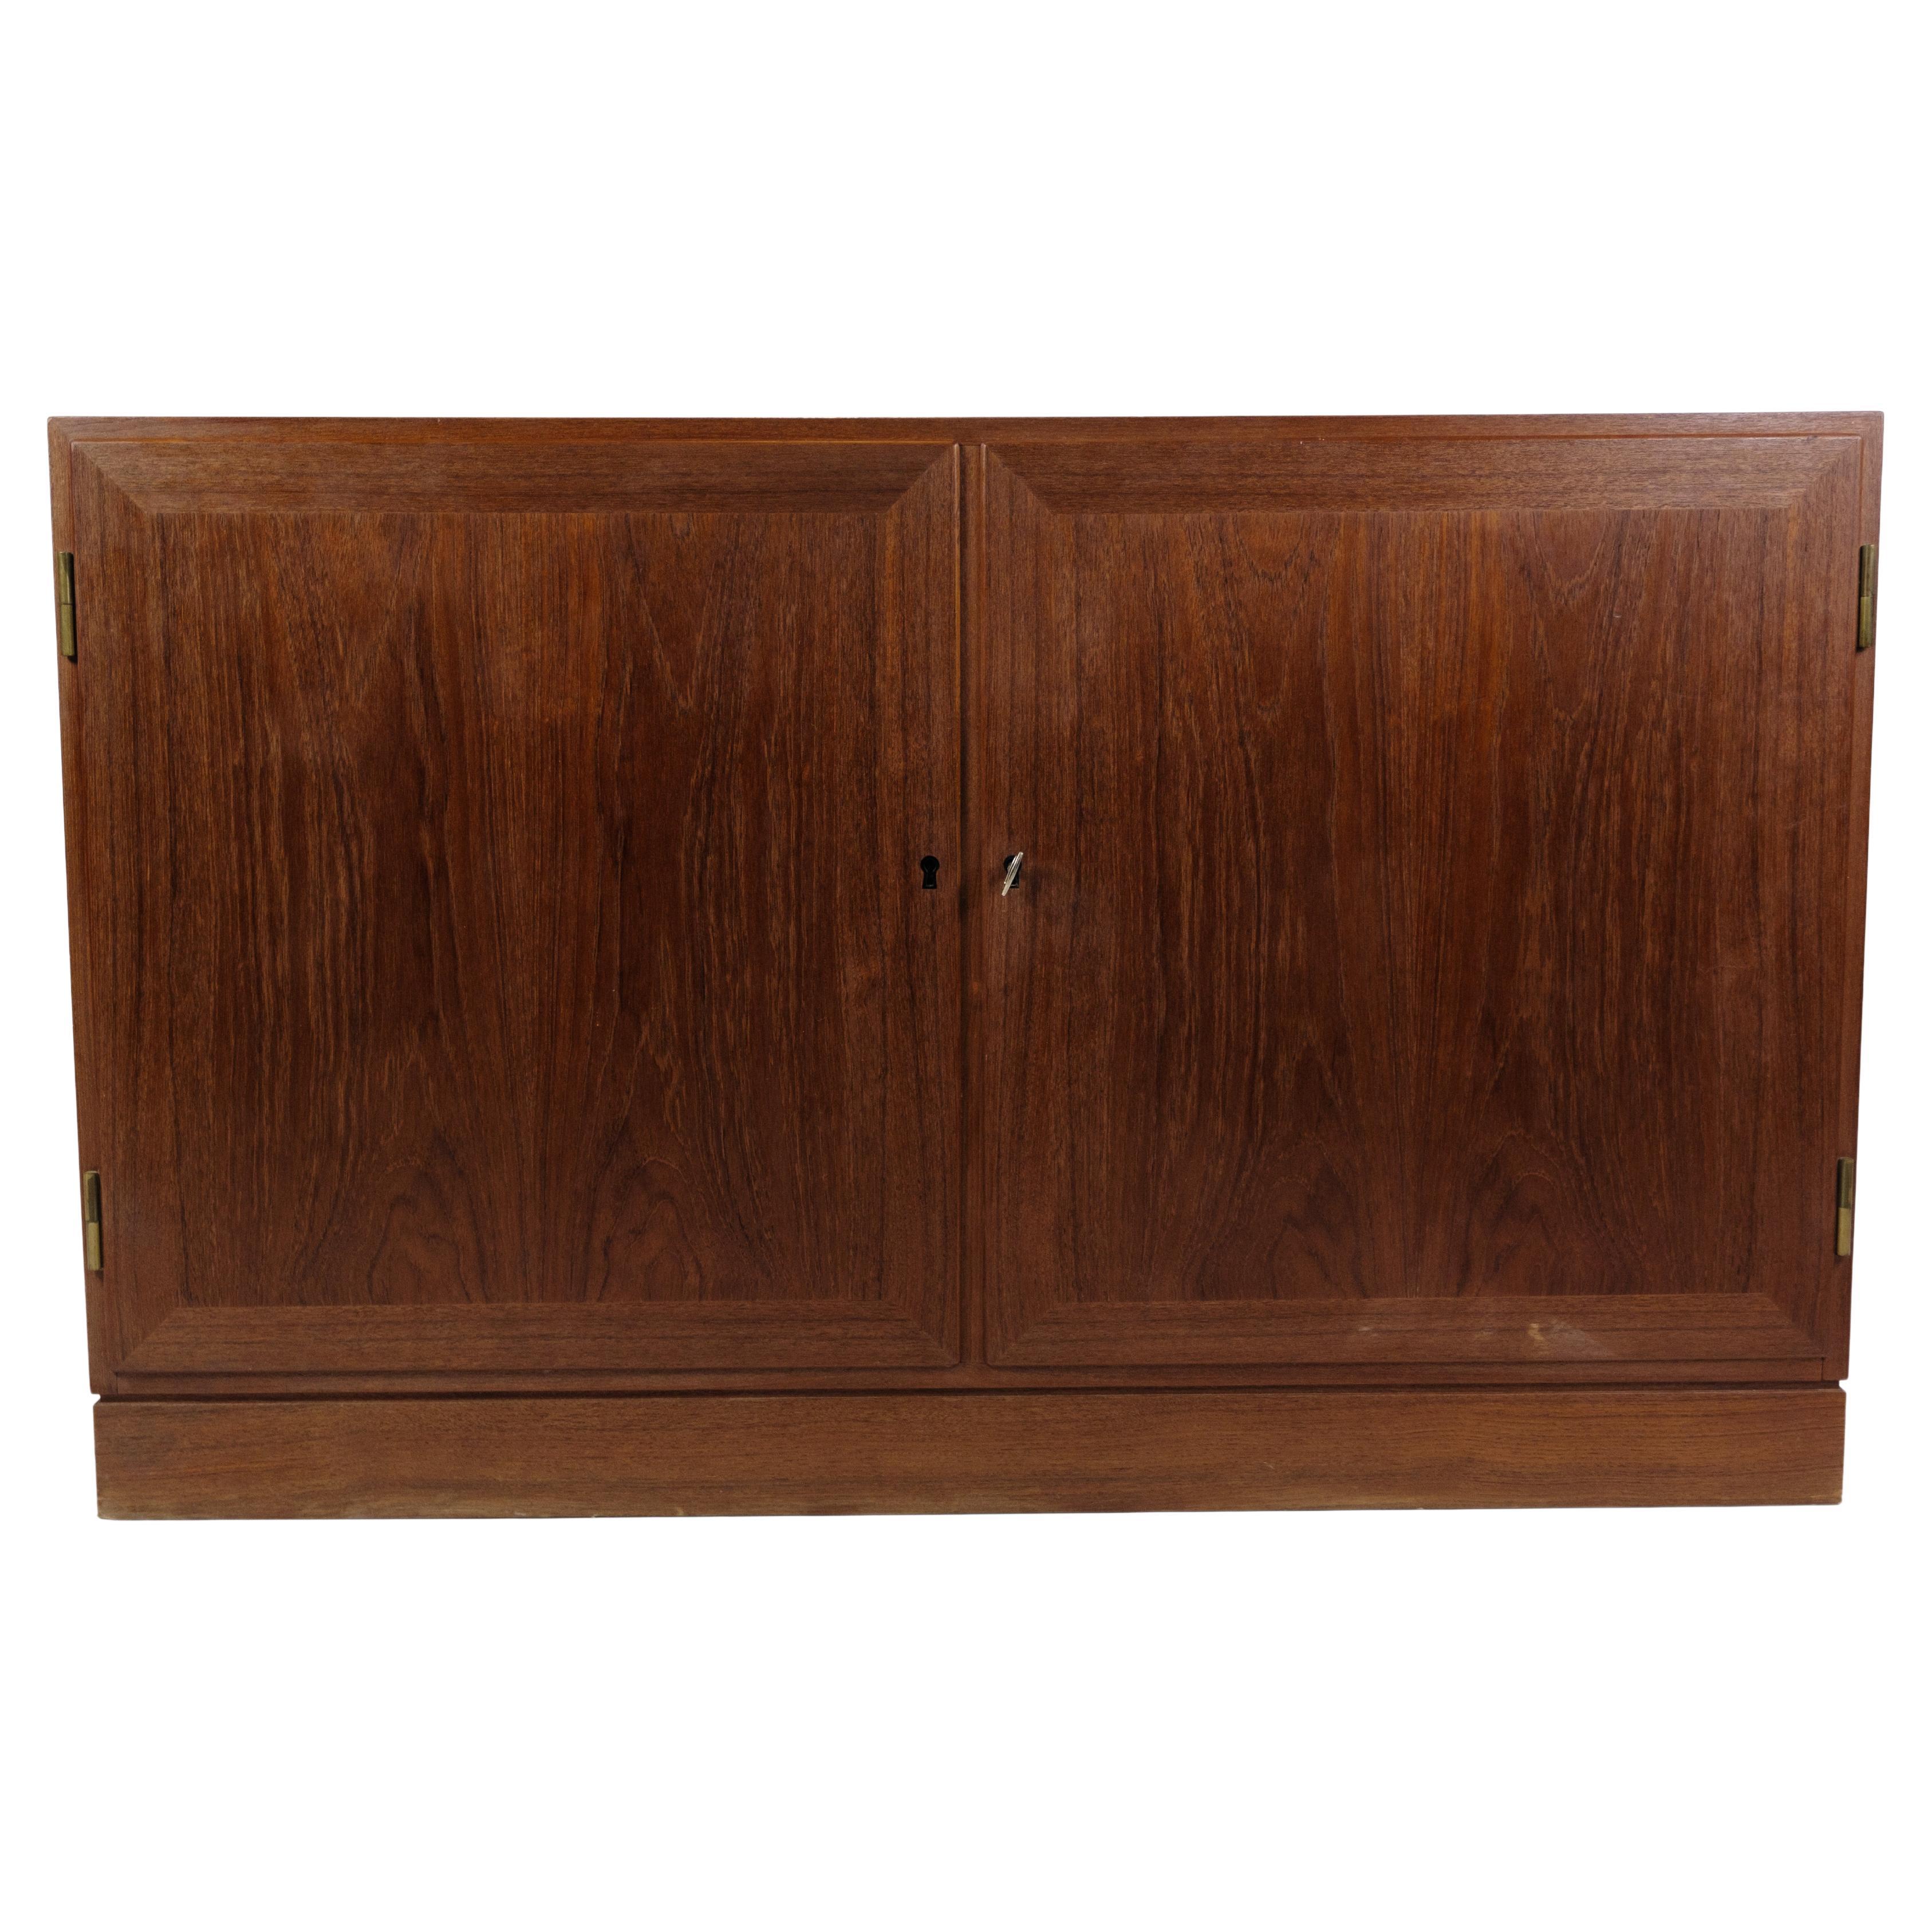 Smaill Side Board Made In Teak, Danish Design From 1960s